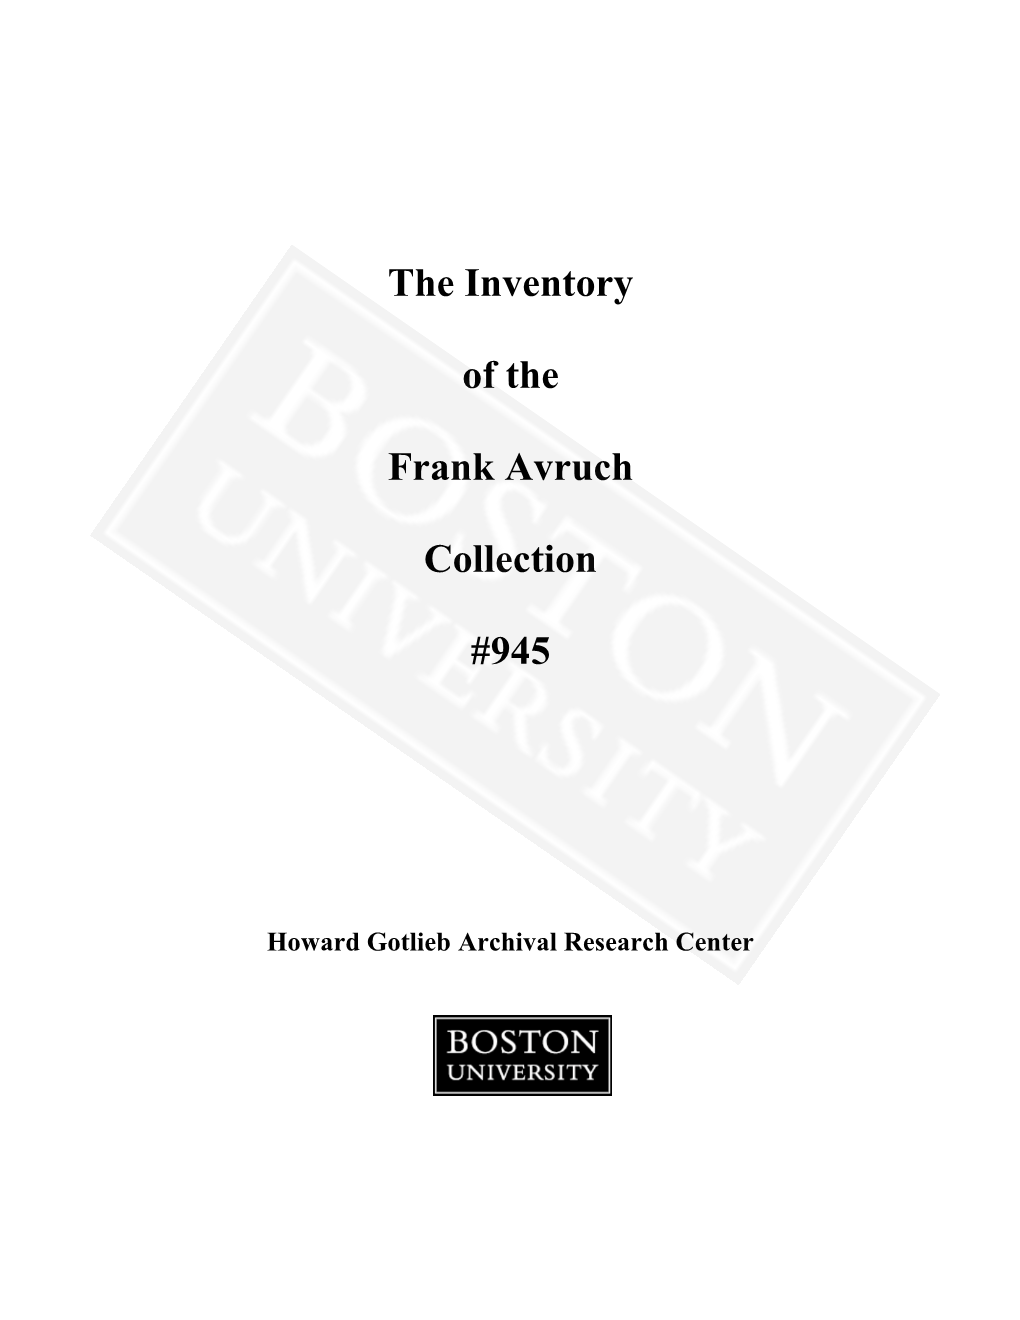 The Inventory of the Frank Avruch Collection #945